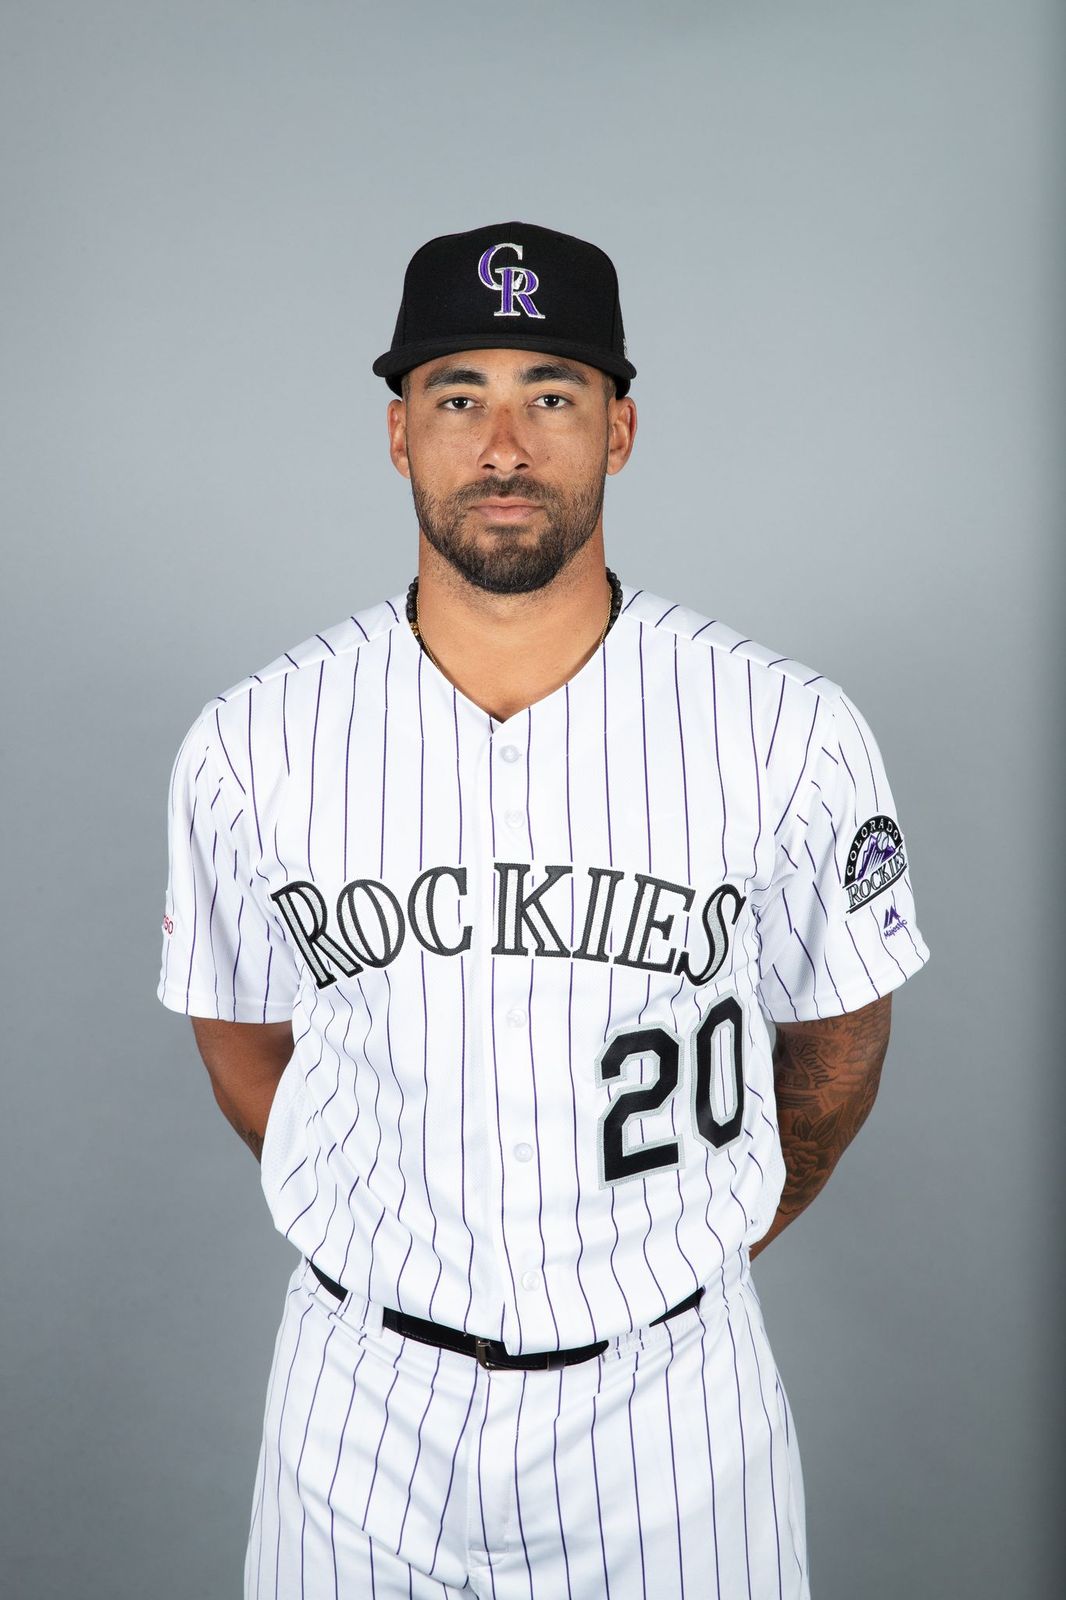 Ian Desmond poses during Photo Day on Wednesday in February 2019 in Scottsdale, Arizona | Source: Getty Images